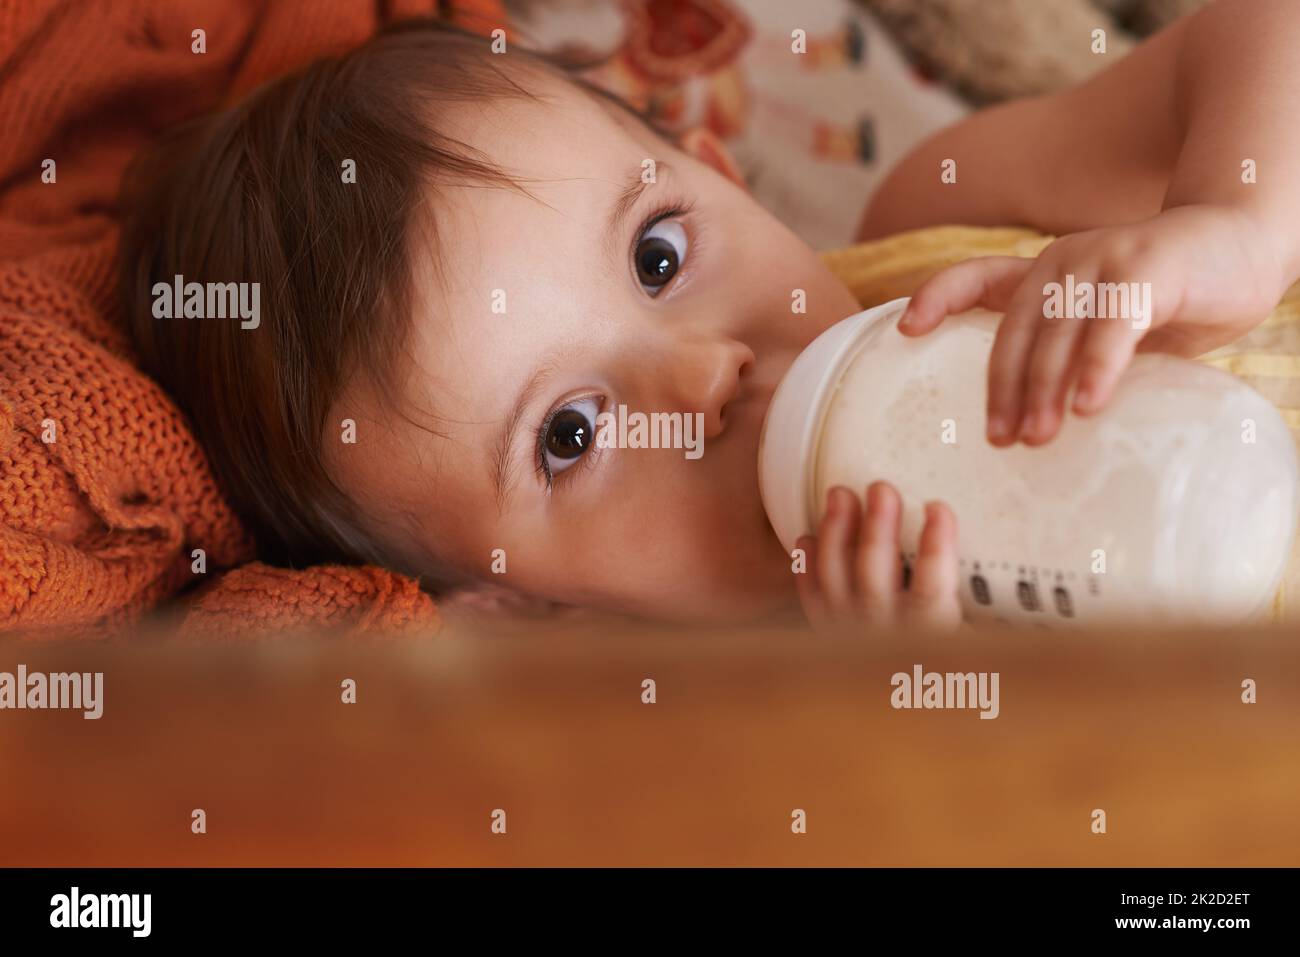 Portrait of a Cute Toddler Drinking Milk from the Bottle, One Year Old Food  Concept Stock Image - Image of home, milk: 144620017